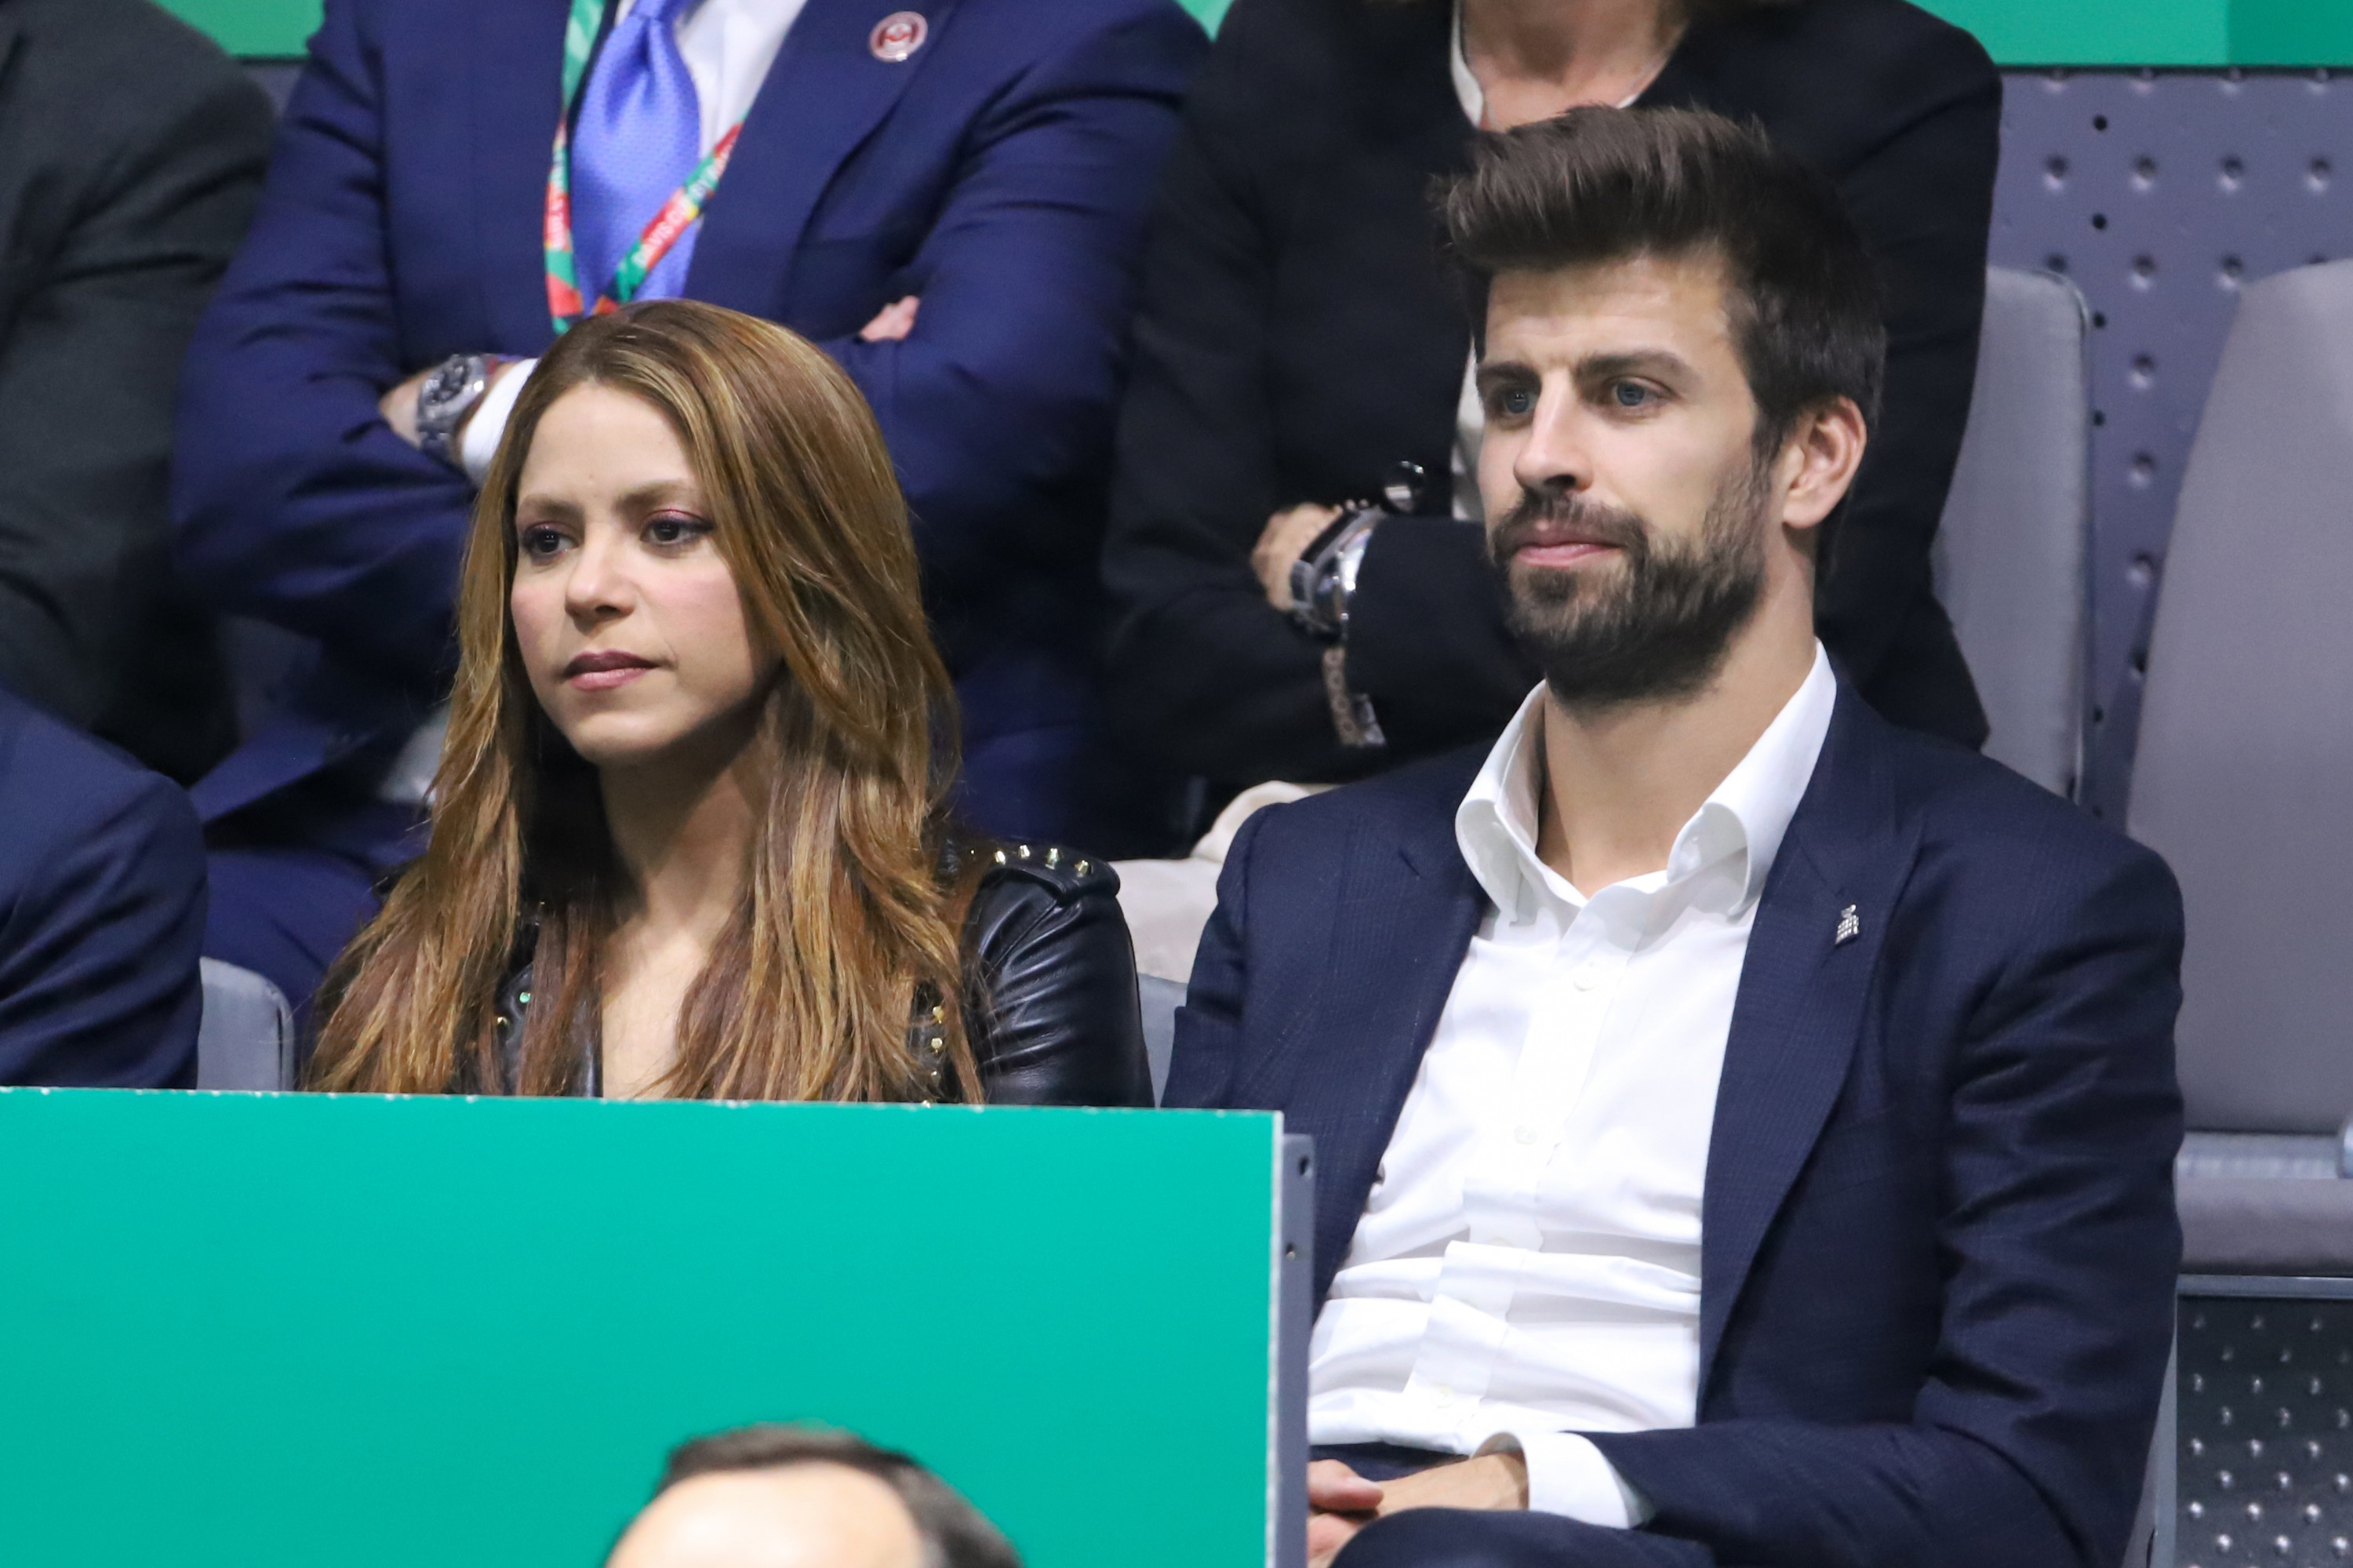 The former couple sitting next to each other a sporting event